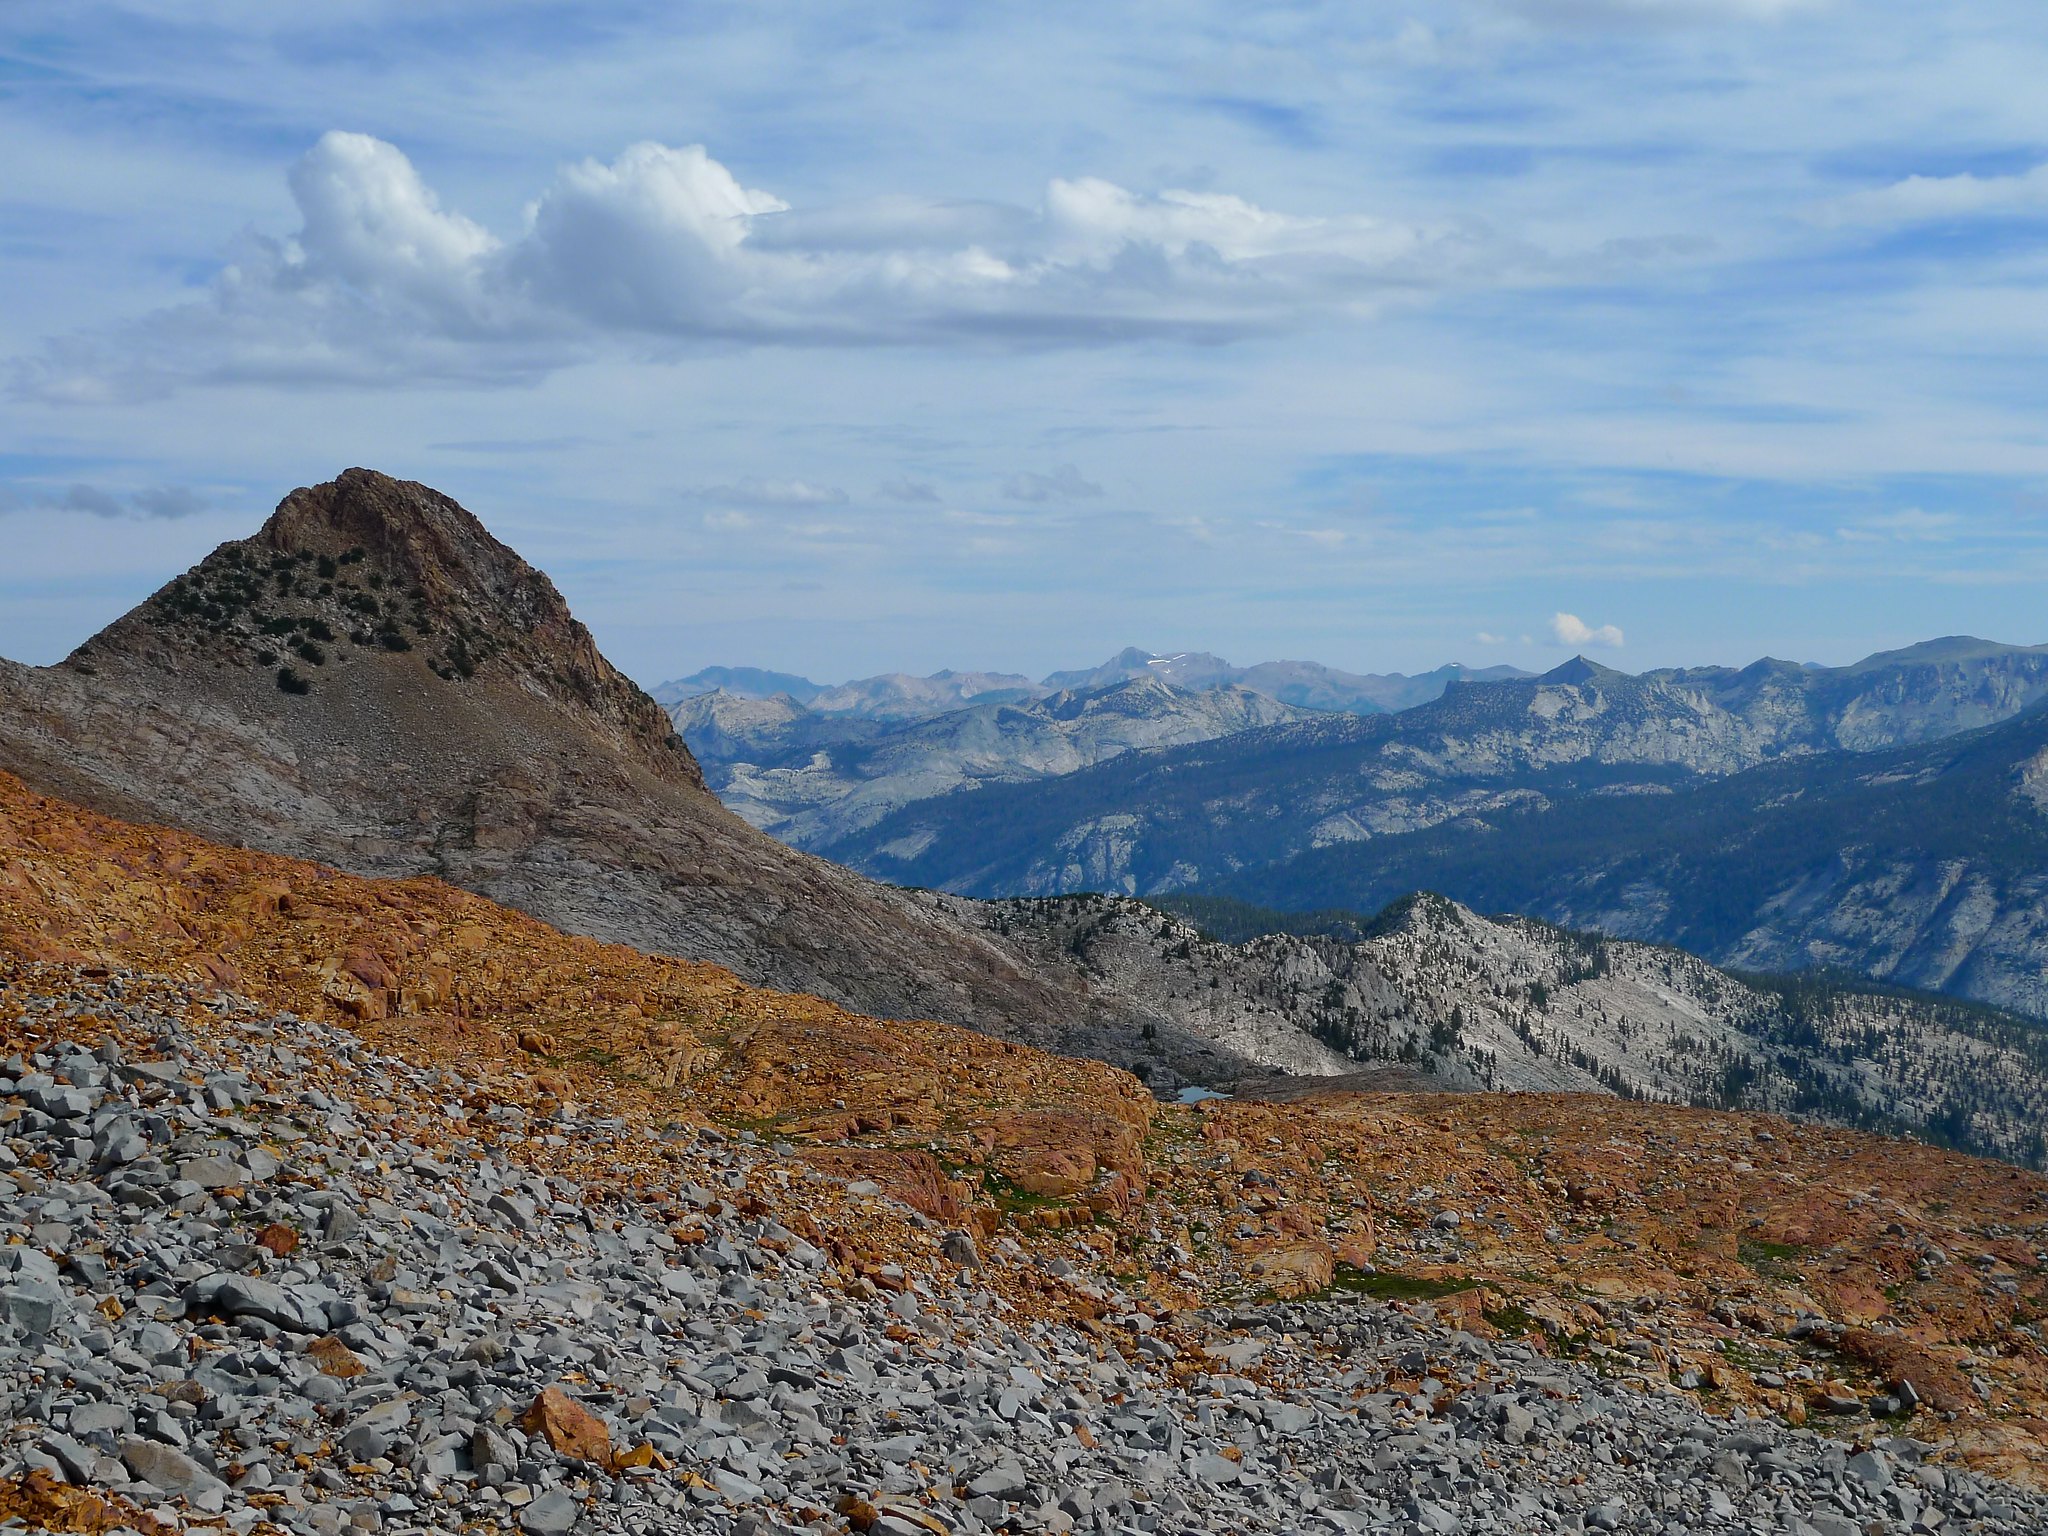 Looking northwest from Red Peak Pass